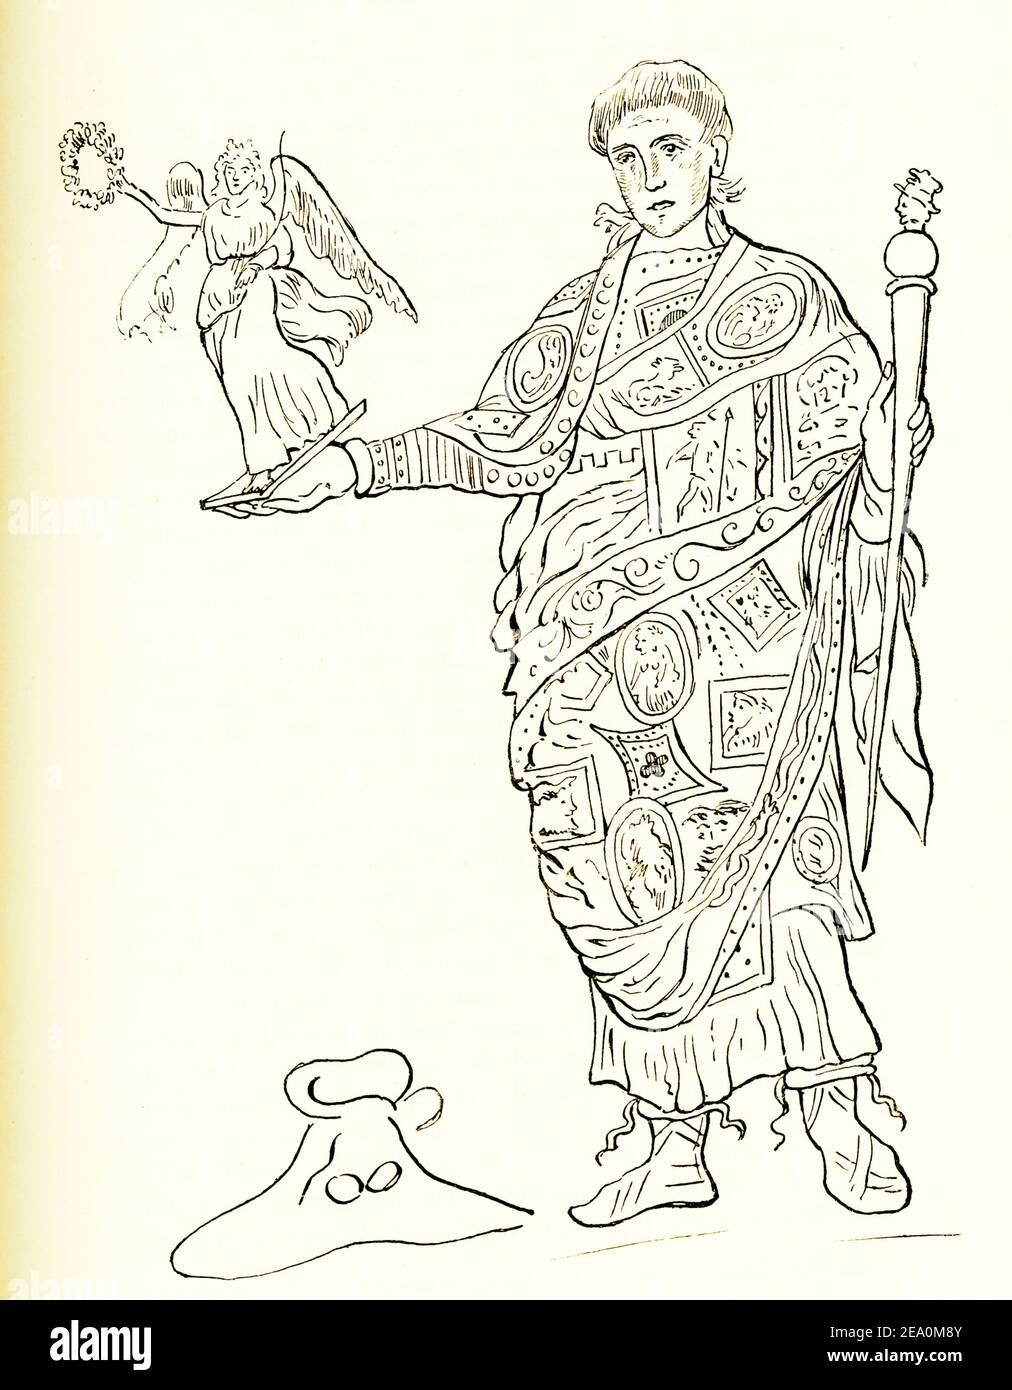 This 1884 illustration shows Constantius in Imperial costume and holding a representation of Nike, the goddess of victory. This is a copy of aminiature by Kondakoff in Russian History of Byzantine Miniature Painting. Constantius I was a Roman emperor. He ruled as Caesar from 293 to 305 and as Augustus from 305 to 306. He was the junior colleague of the Augustus Maximian under the Tetrarchy and succeeded him as senior co-emperor of the western part of the empire. Constantius ruled the West while Galerius was Augustus in the East. Stock Photo